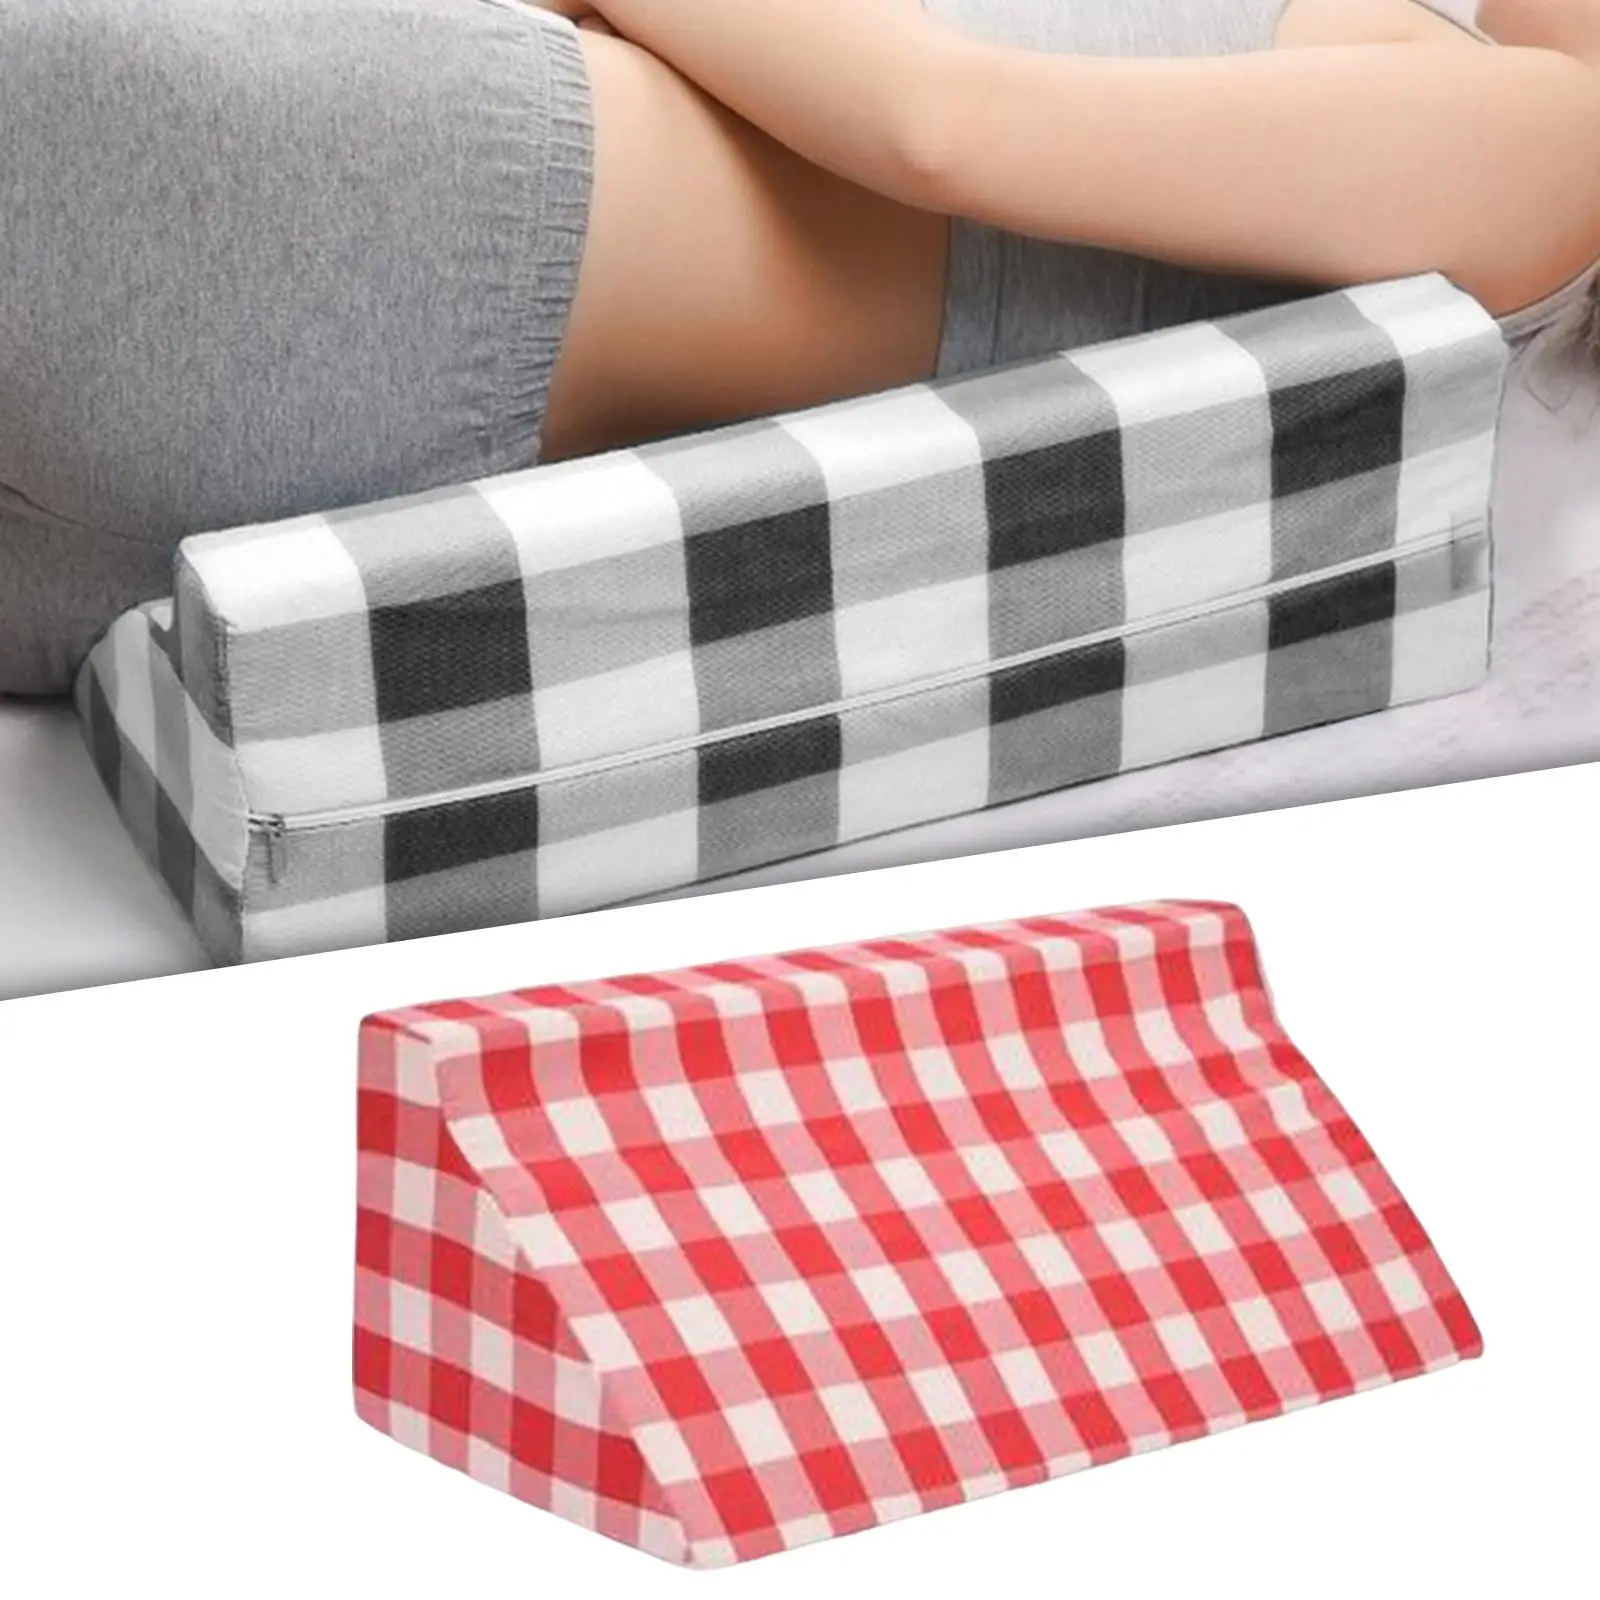 Bed Wedge Pillow Side Sleeping Cushion for Back Washable Slanted for Bedroom